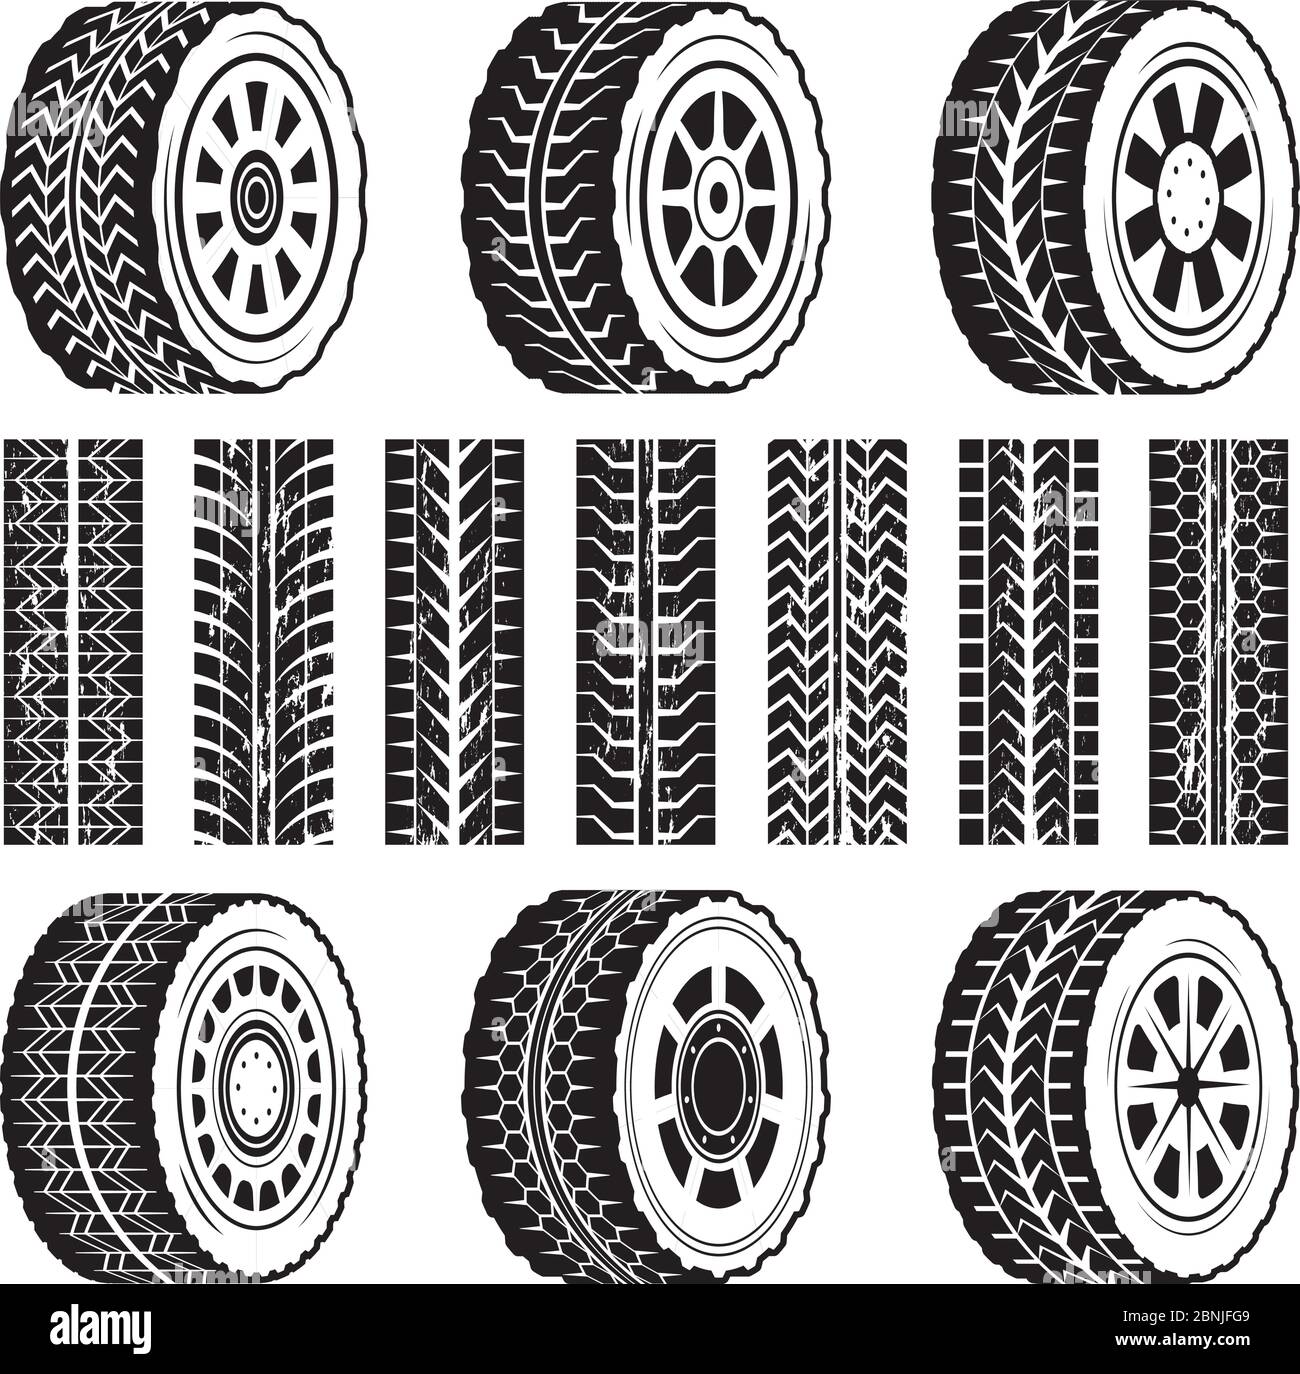 Racing wheels and their protector shapes Stock Vector